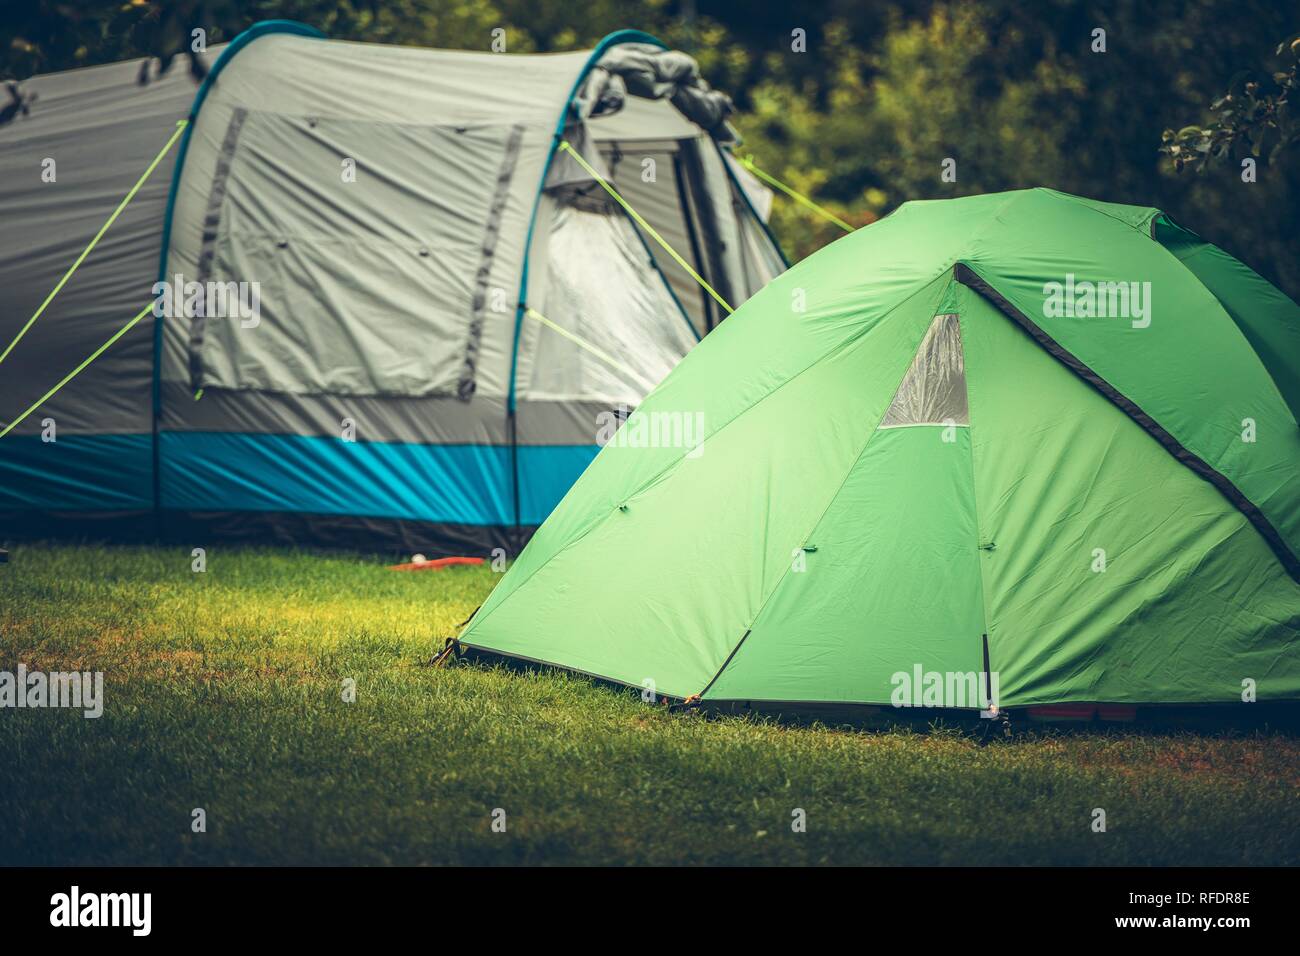 Summer Vacation Camping in a Tent. Campsite with Two Large Tents. Stock Photo